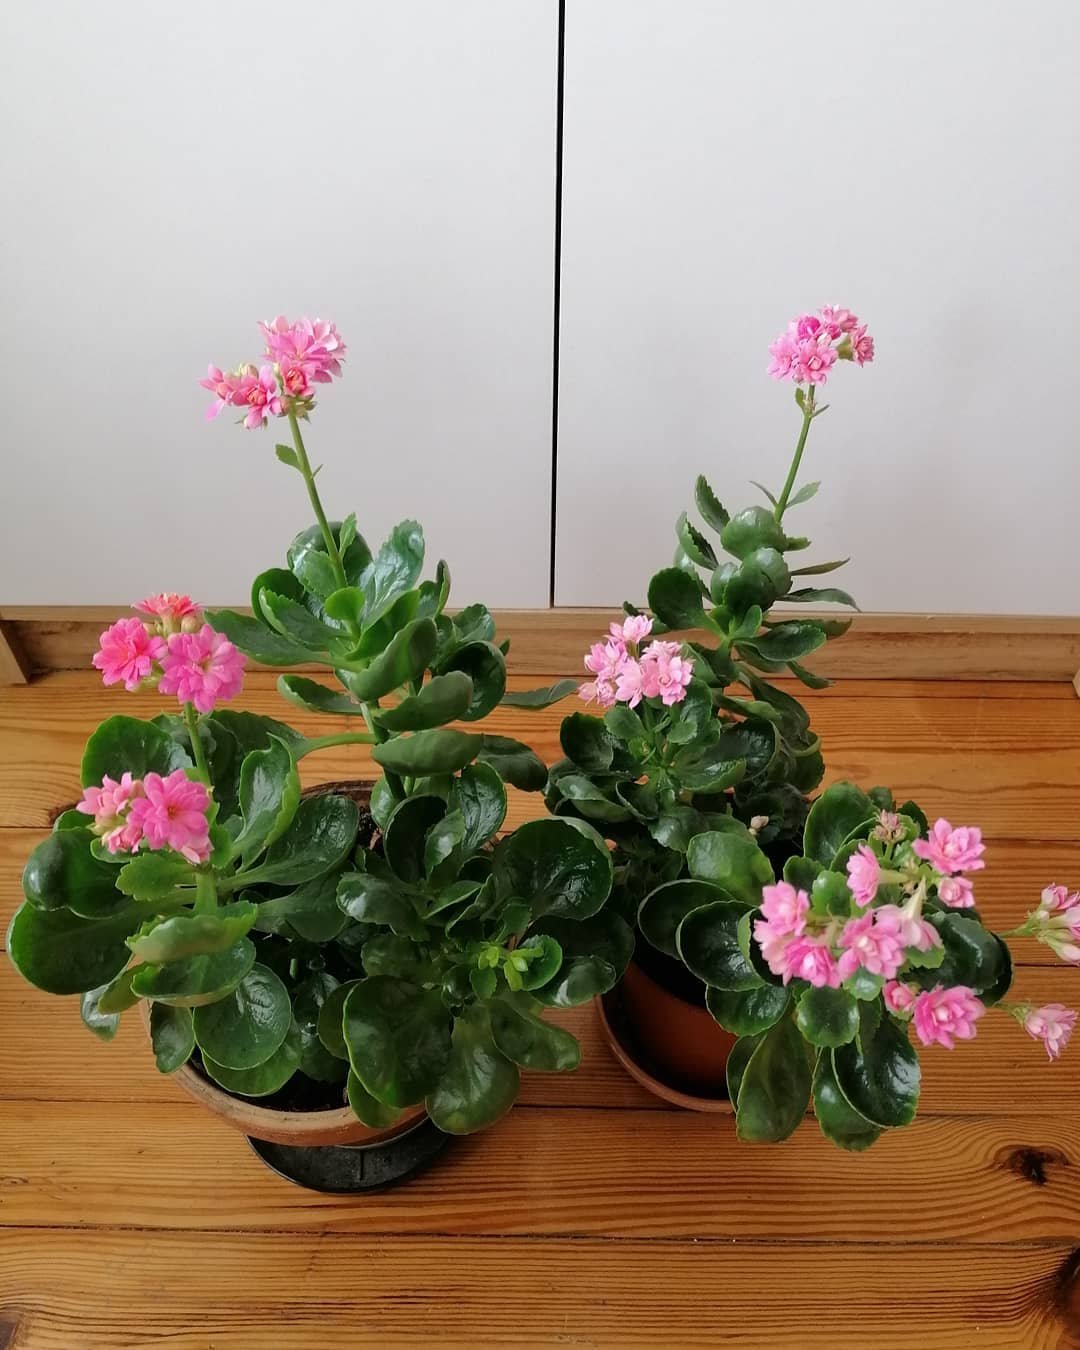  15 Pink Houseplants To Add A Pop of Color To Your Home